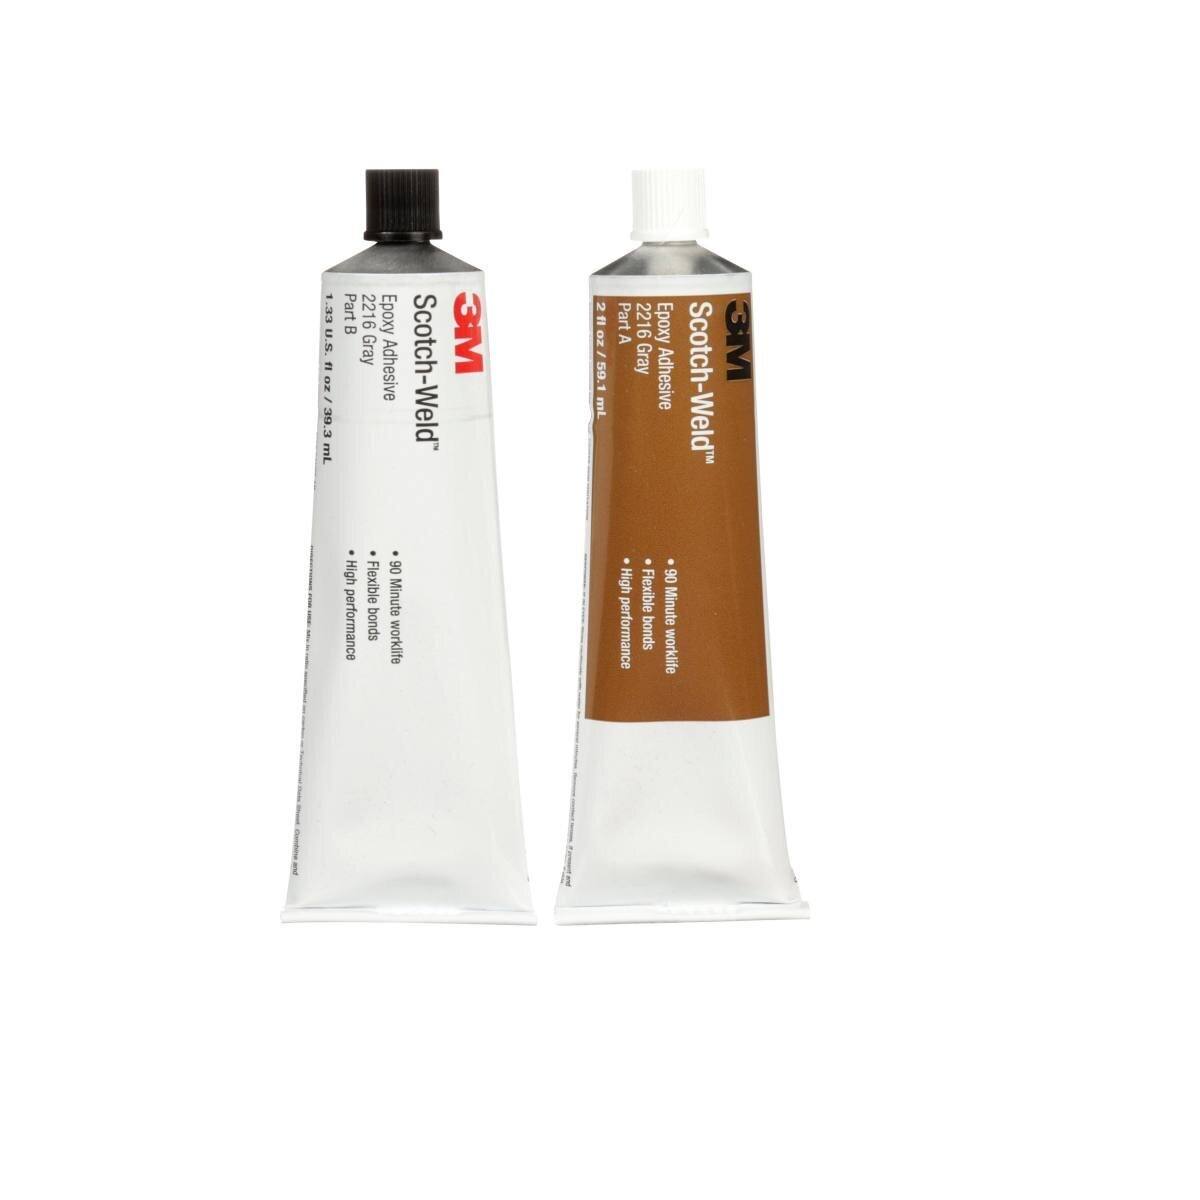 3M Scotch-Weld 2-component construction adhesive based on epoxy resin 2216 B/A, gray, 250 ml